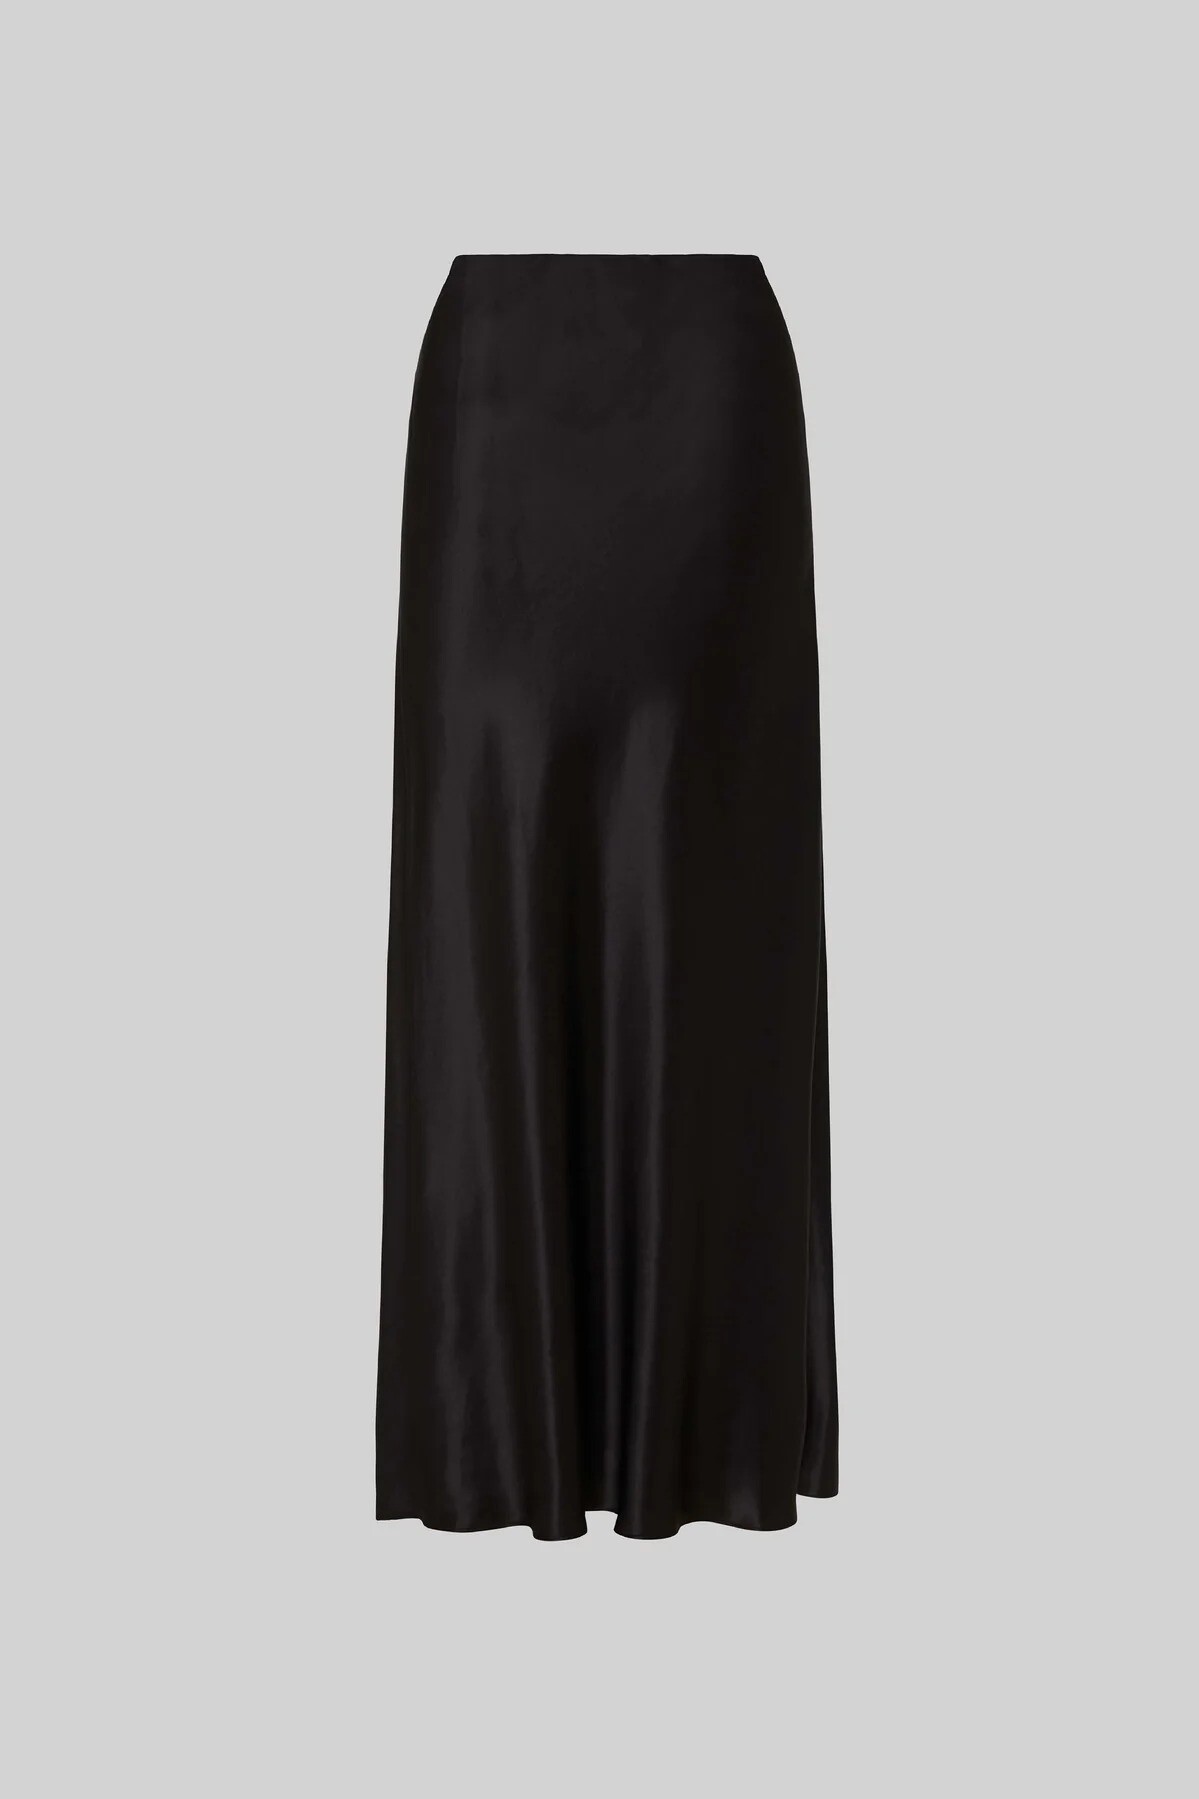 THE WILLA SILK SKIRT (BLACK)- FRIENDS WITH FRANK. SPRING 22 Boxing Day Sale